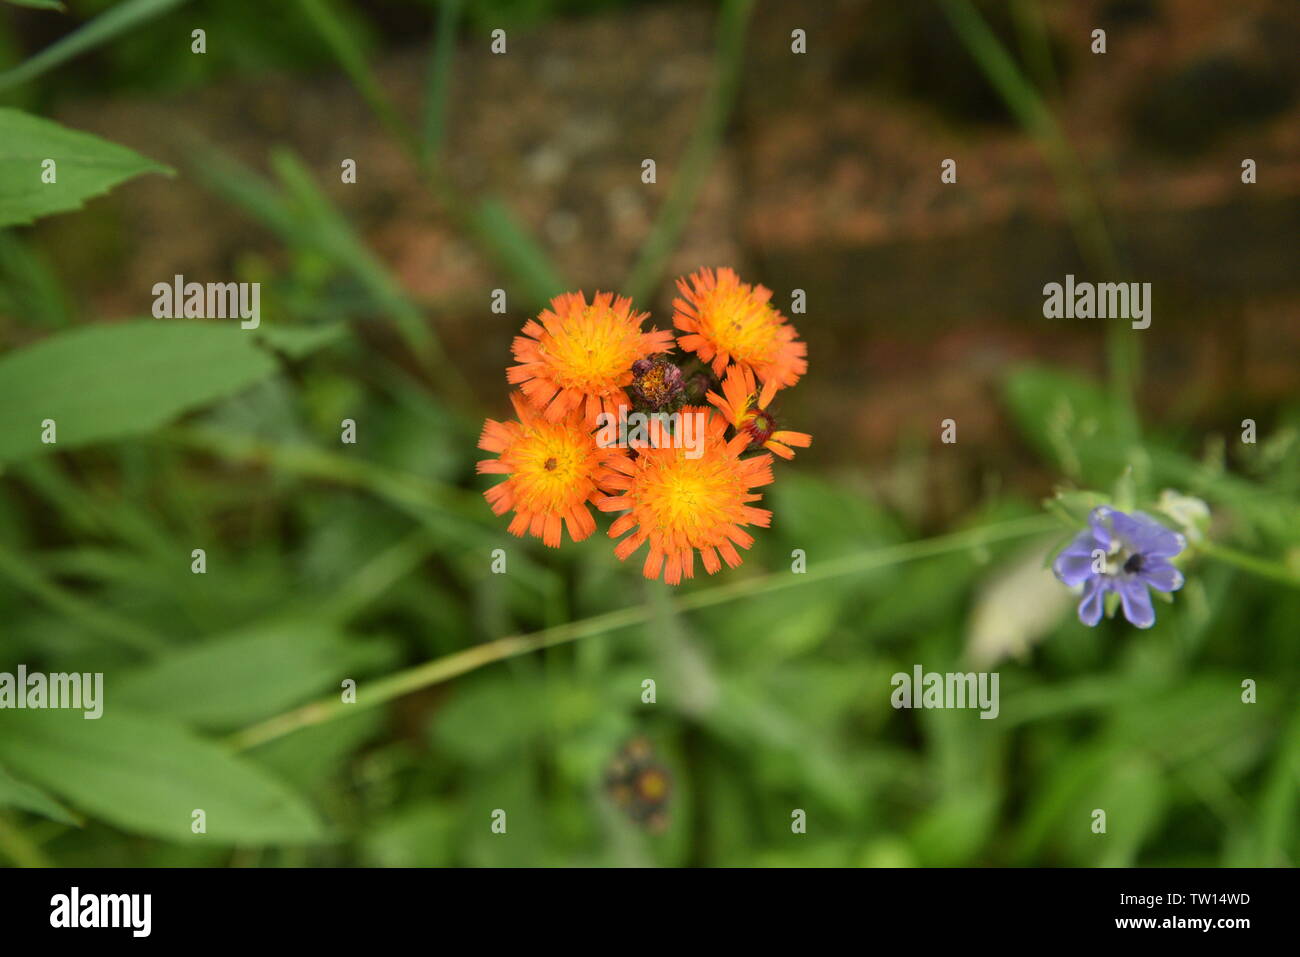 Fox and cubs flowers Stock Photo